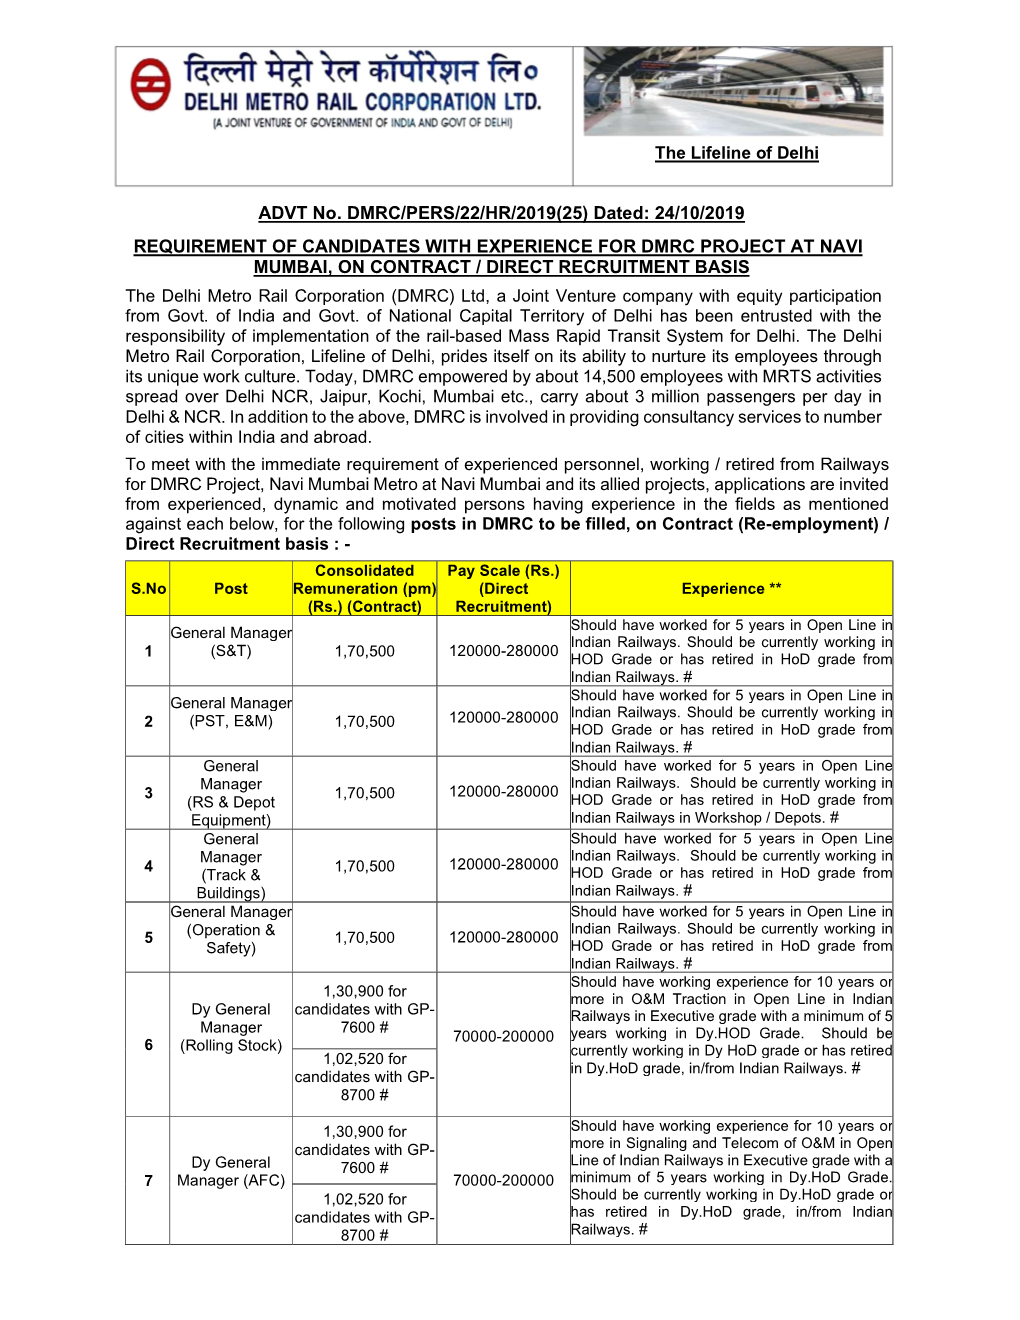 ADVT No. DMRC/PERS/22/HR/2019(25) Dated: 24/10/2019